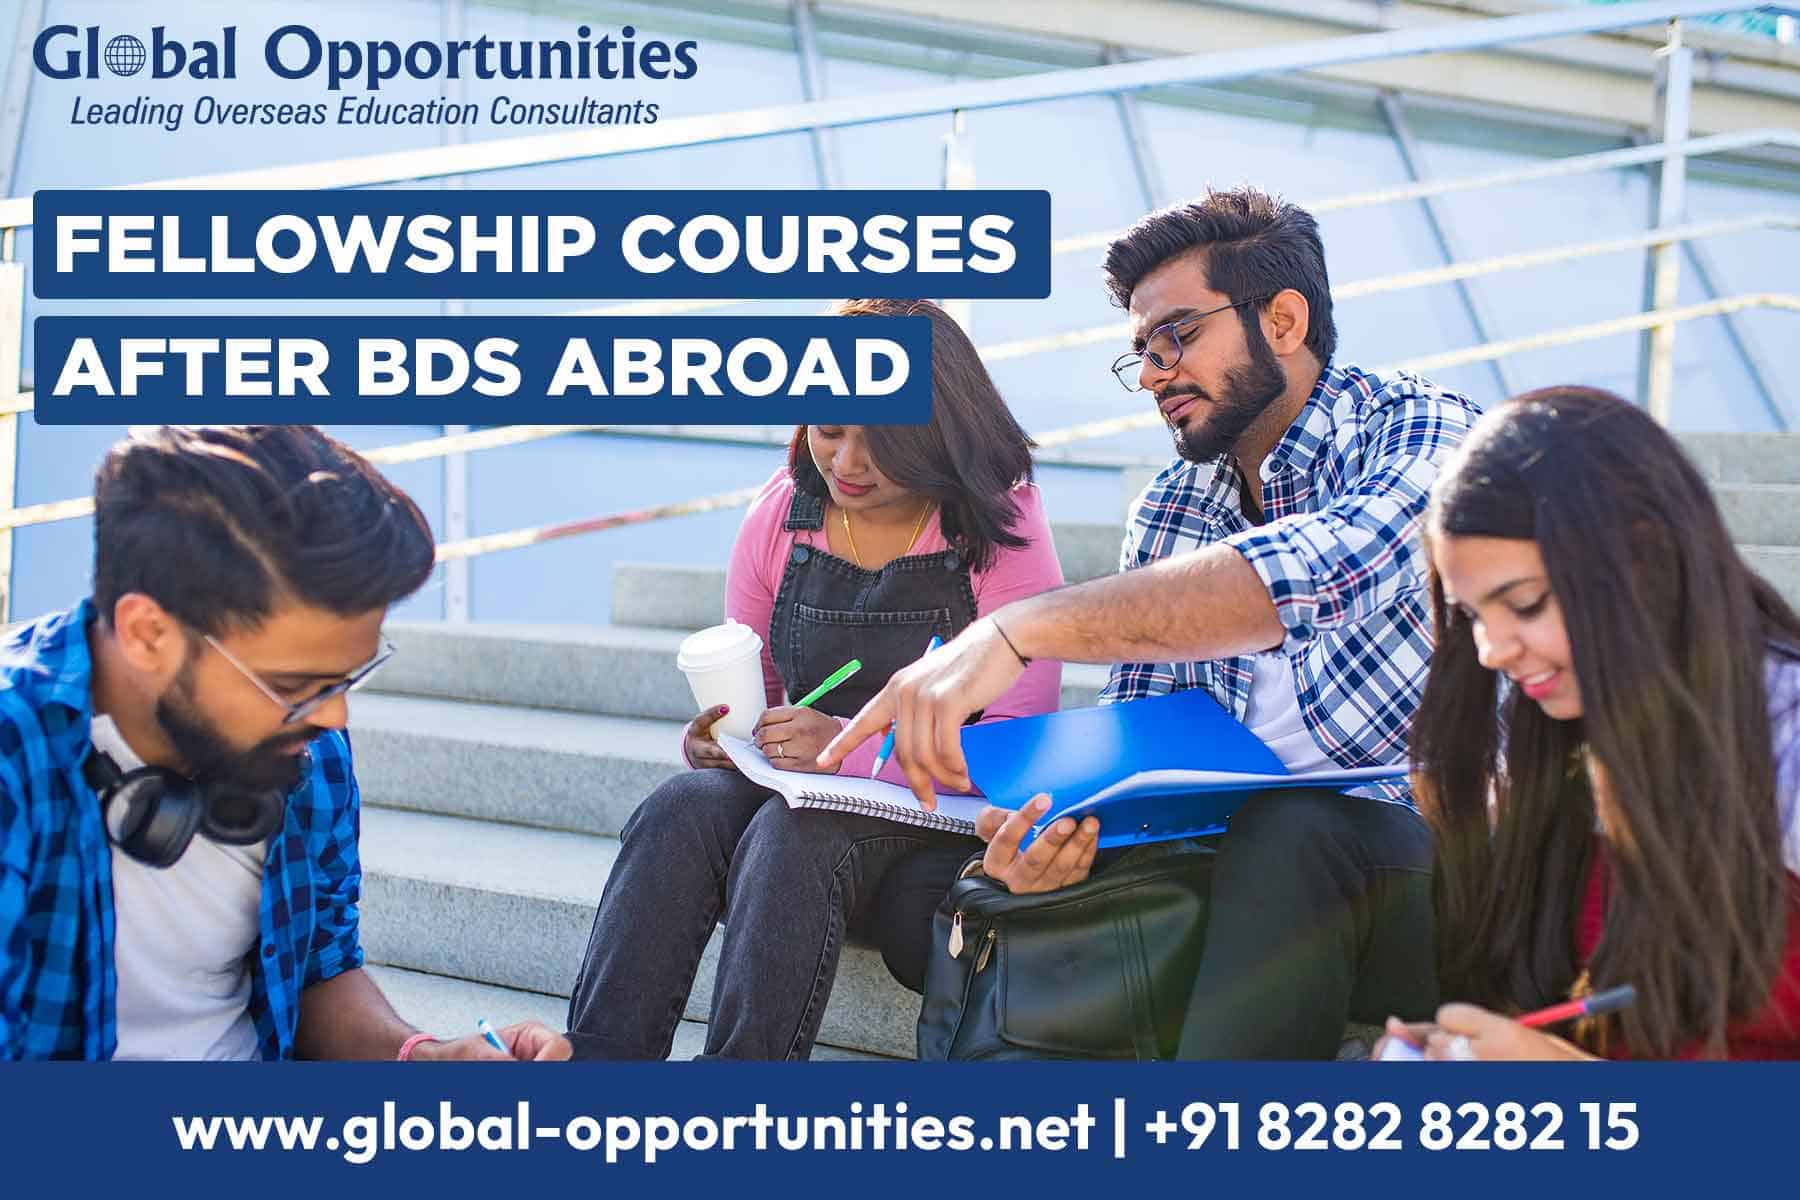 Fellowship Courses After BDS Abroad